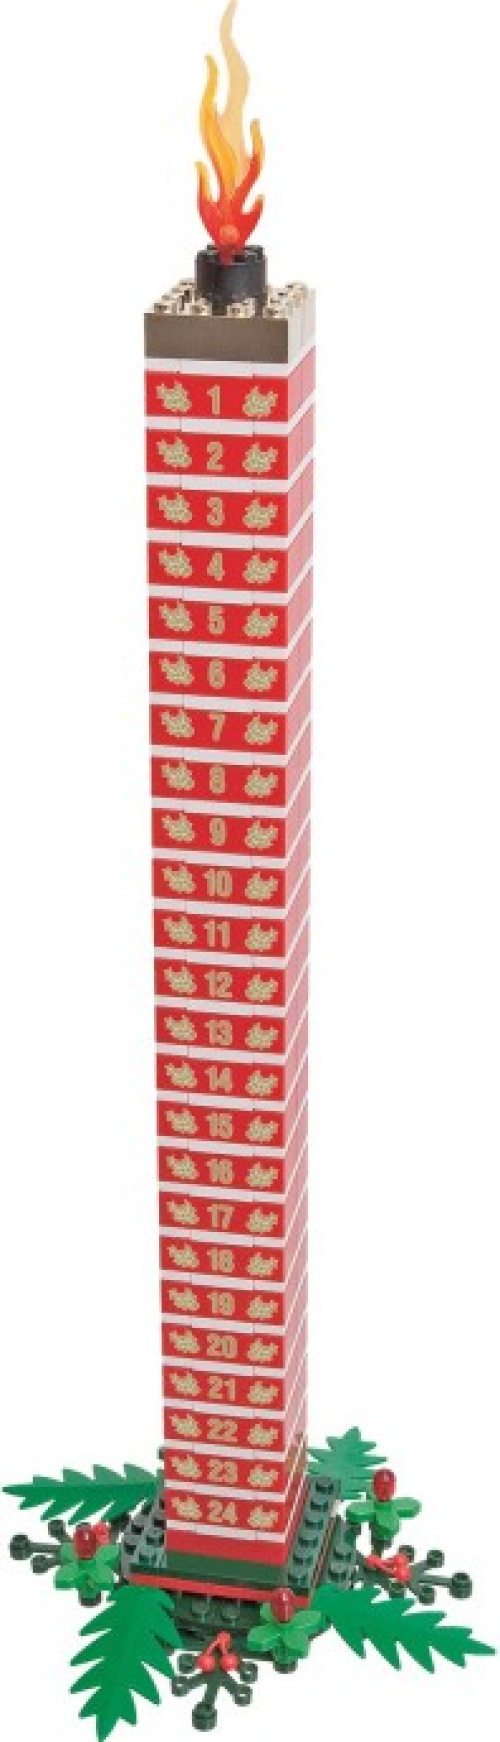 852741-1 LEGO Holiday Countdown Candle